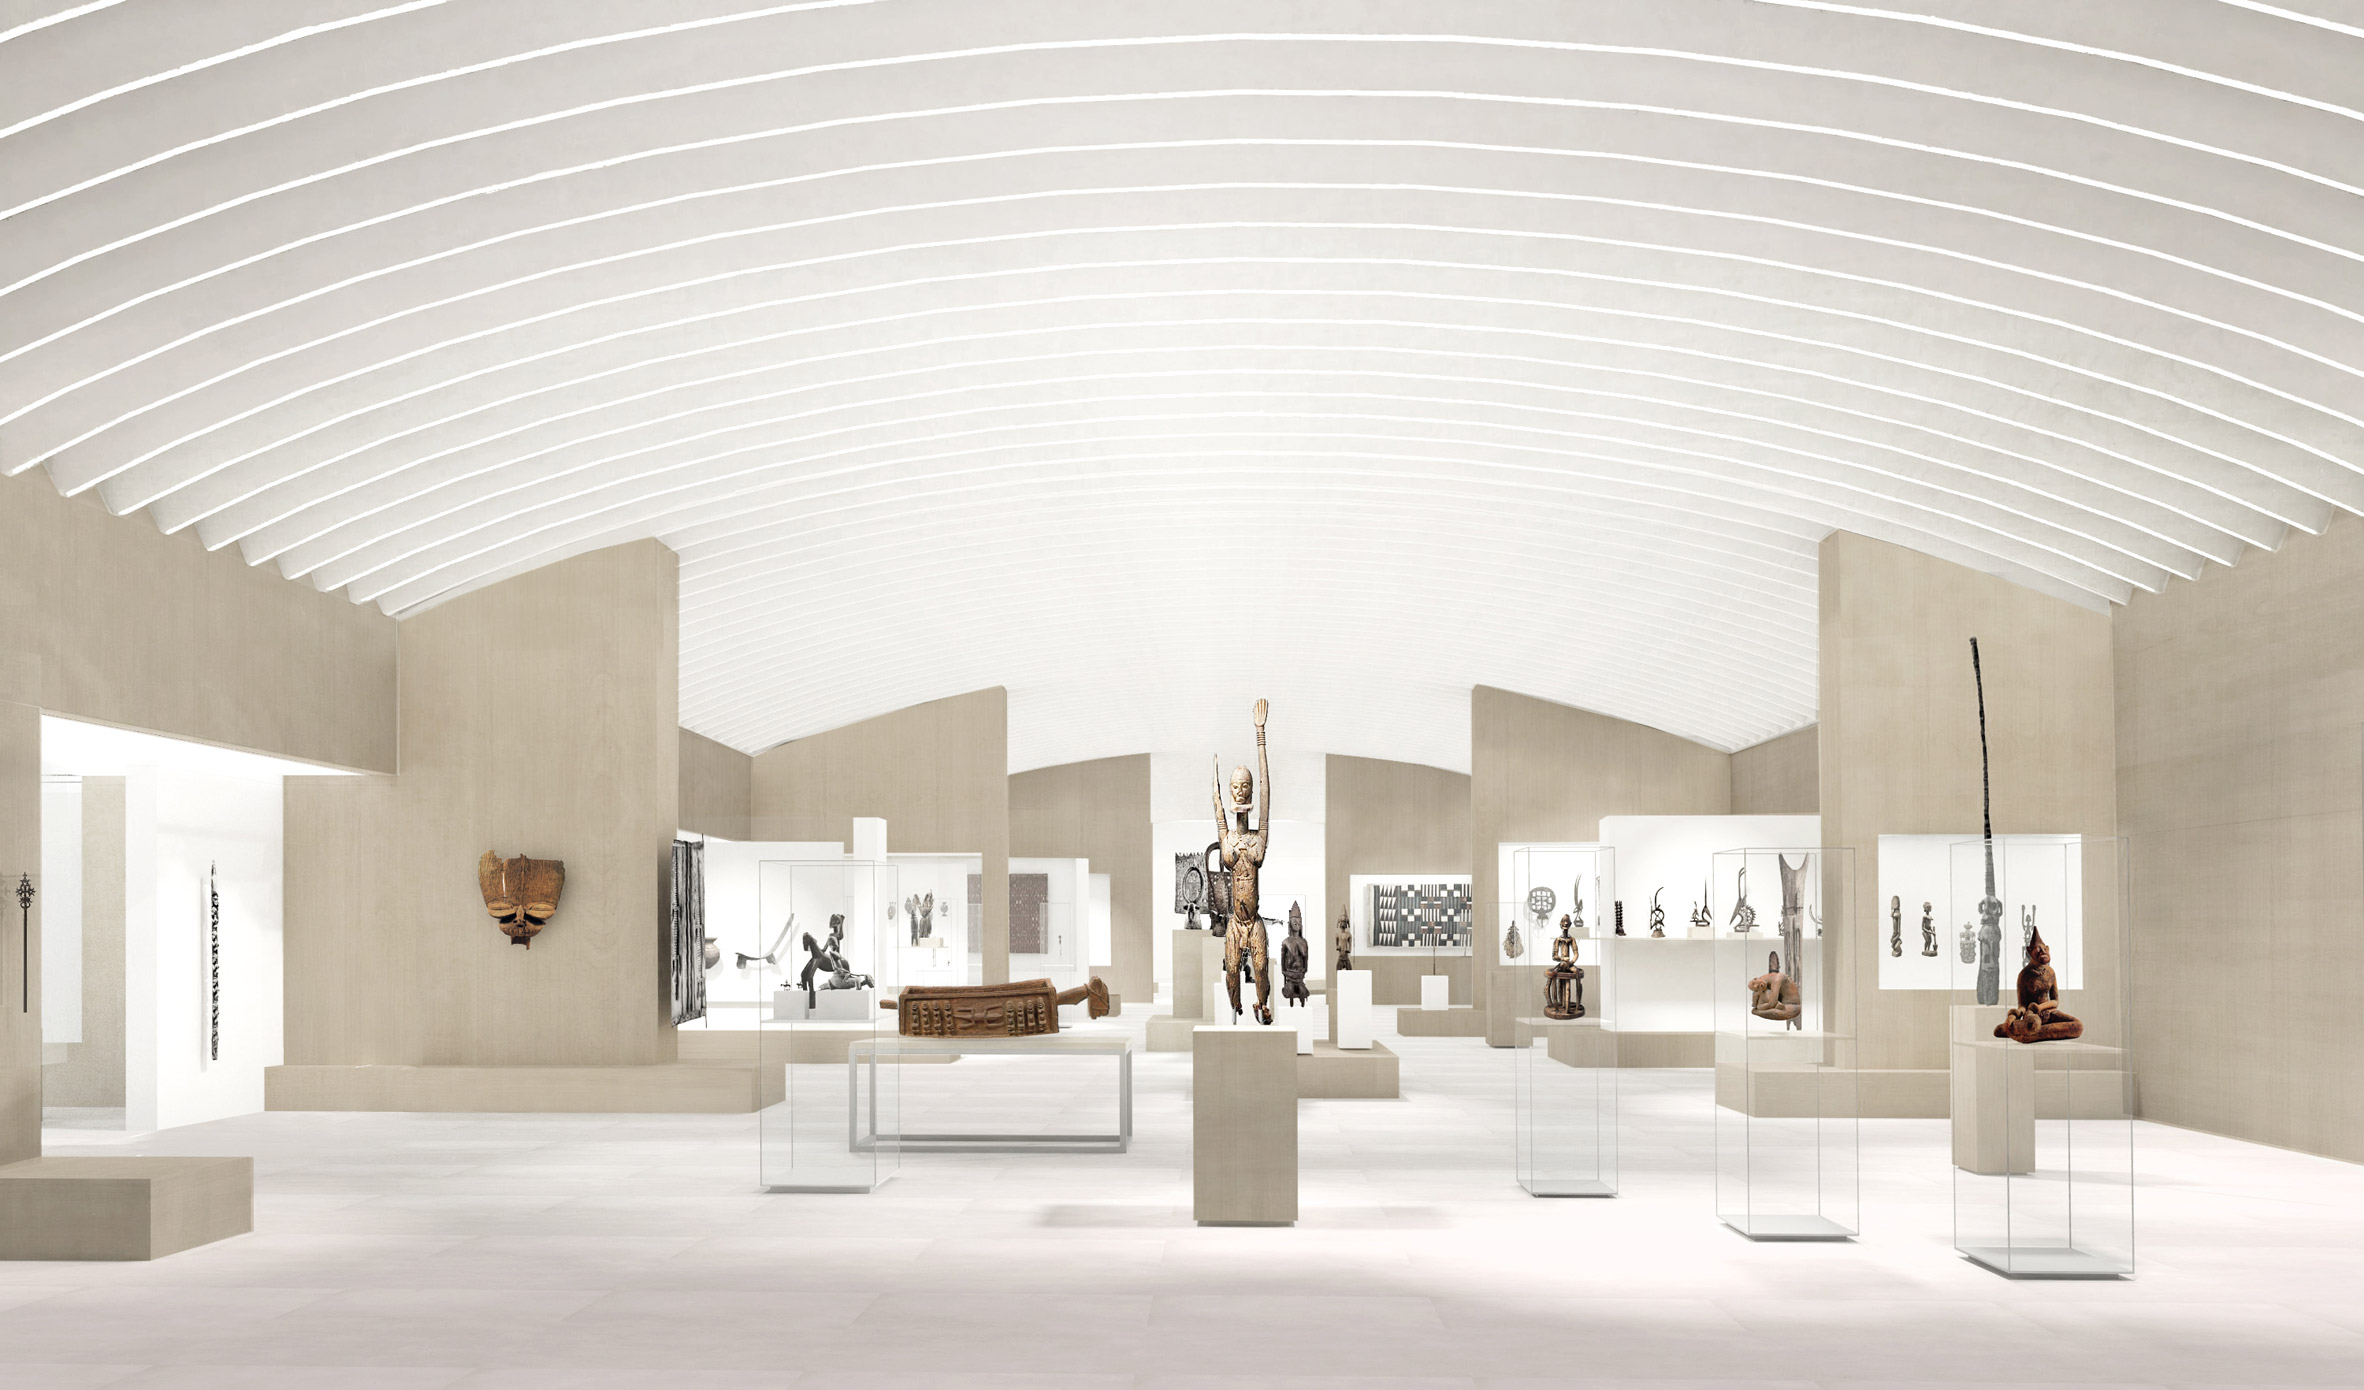 The Met announces $70 million renovation of Africa, Oceania and Americas galleries